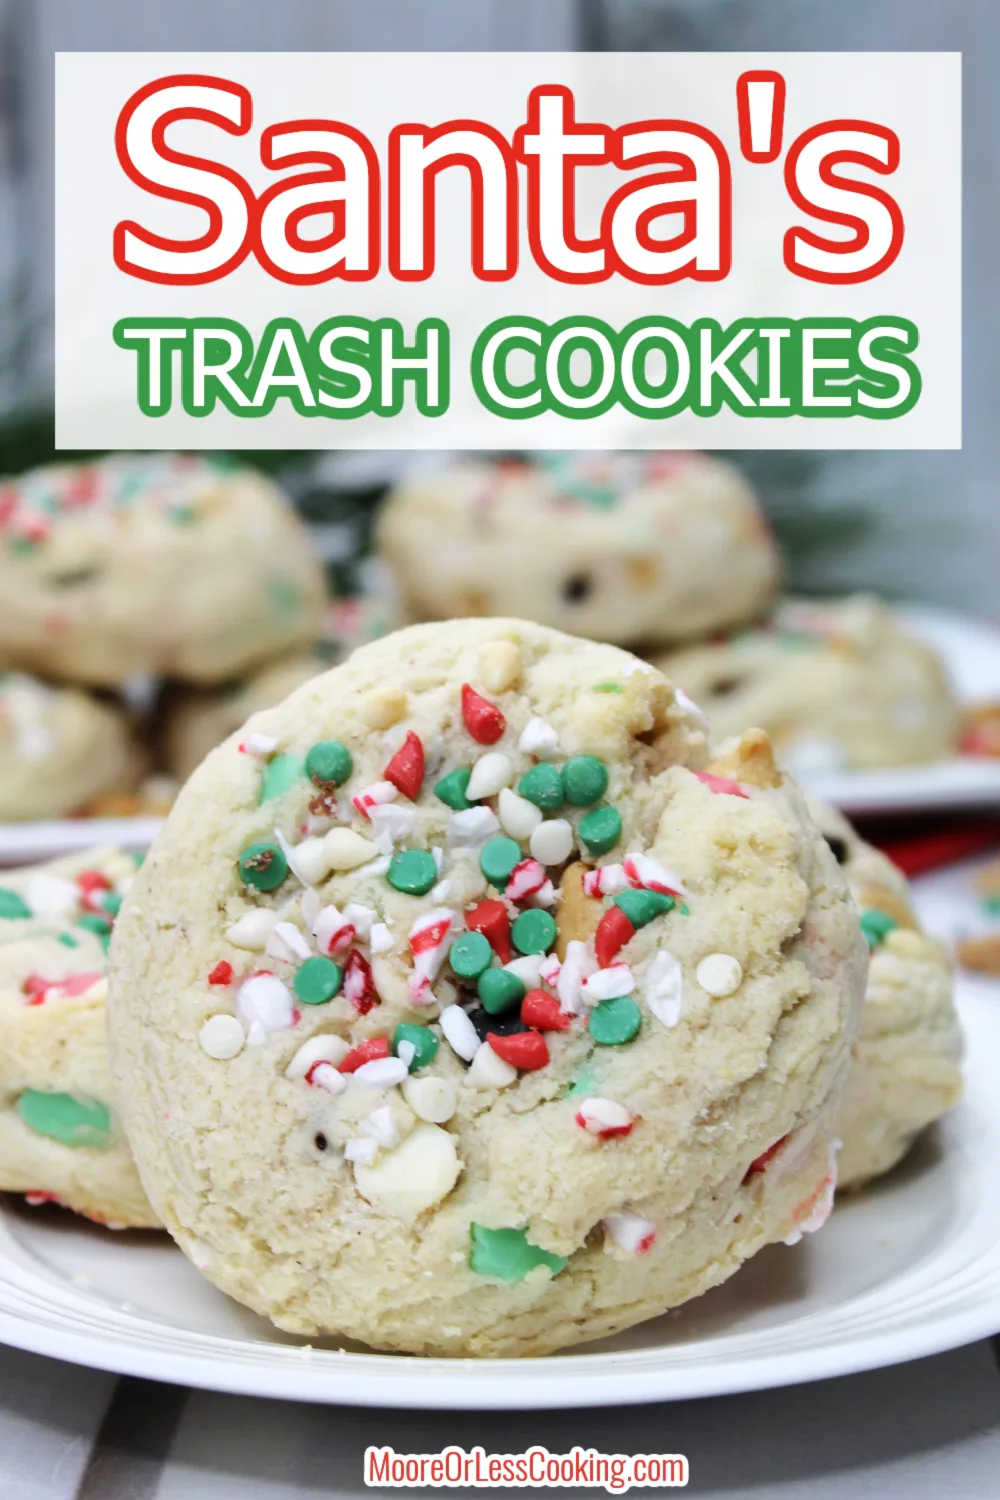 Sweet, salty and full of irresistible ingredients, leave a plate of these Santa's Trash Cookies out for Mr. Claus and his helpers to munch on this holiday season. They're the ultimate festive cookies that are full of crushed pretzels plus an assortment of chocolate chips, candies and sprinkles! via @Mooreorlesscook